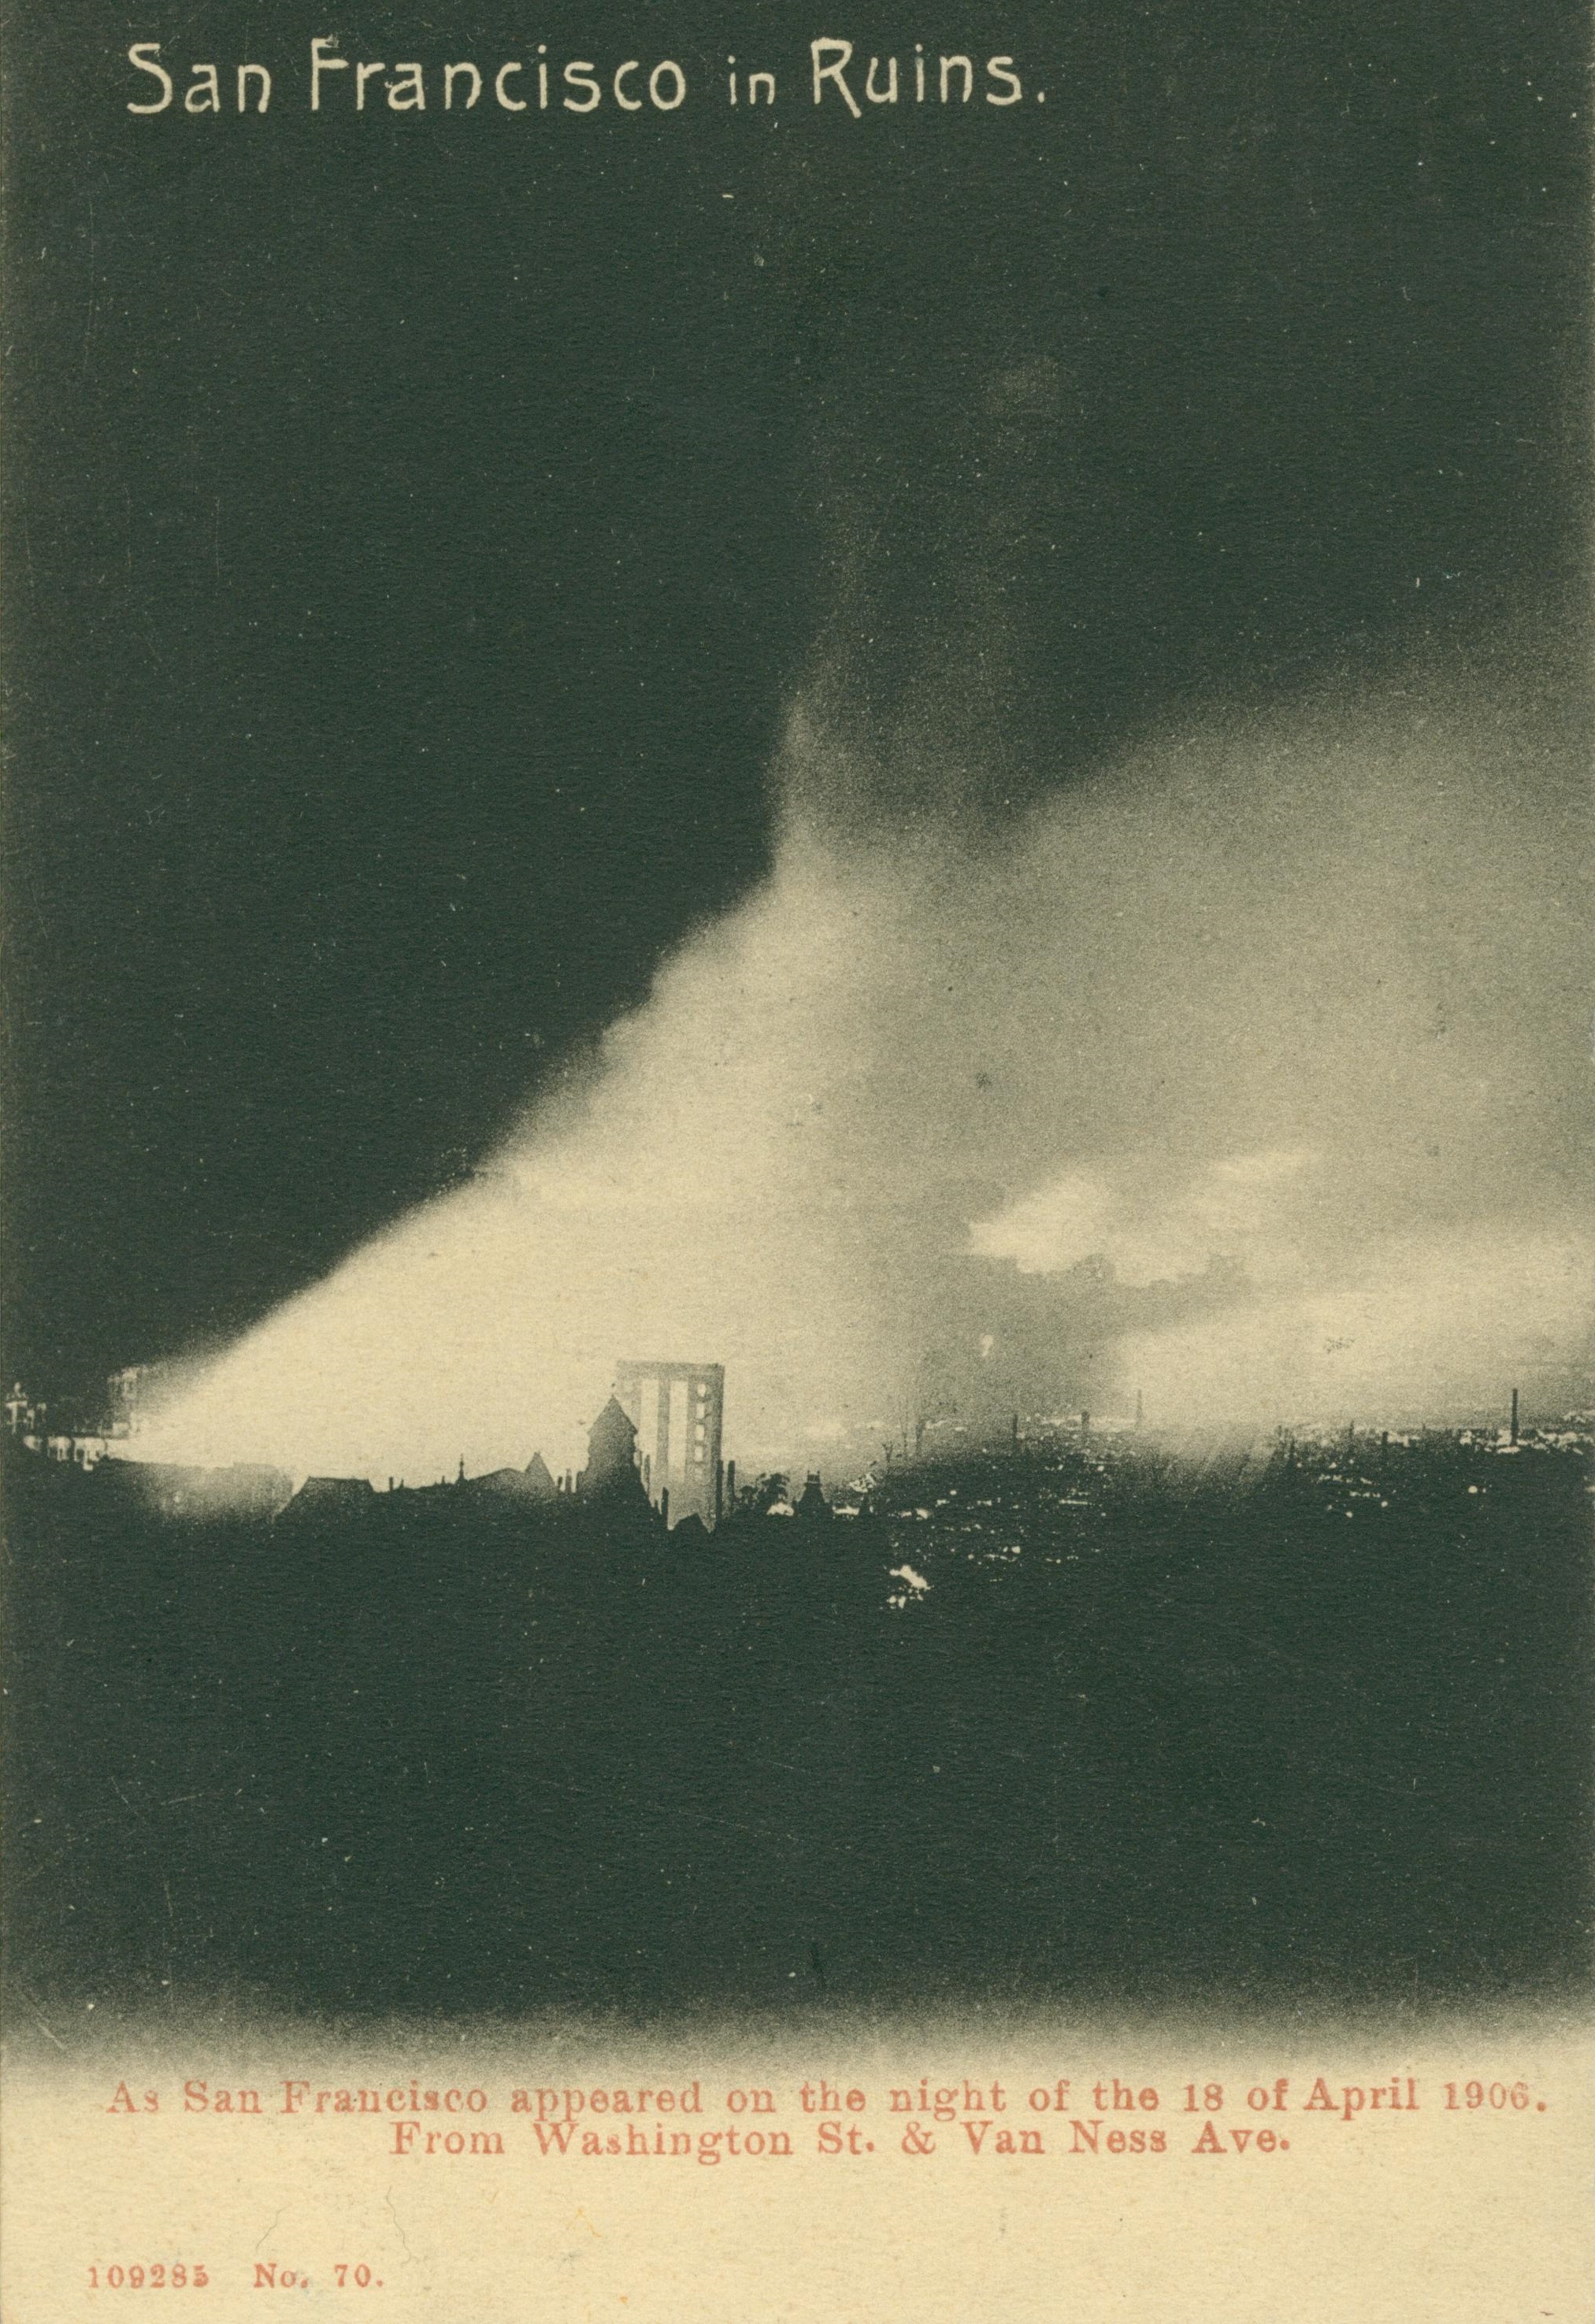 Shows a view of San Francisco on the night of April 18, 1906.